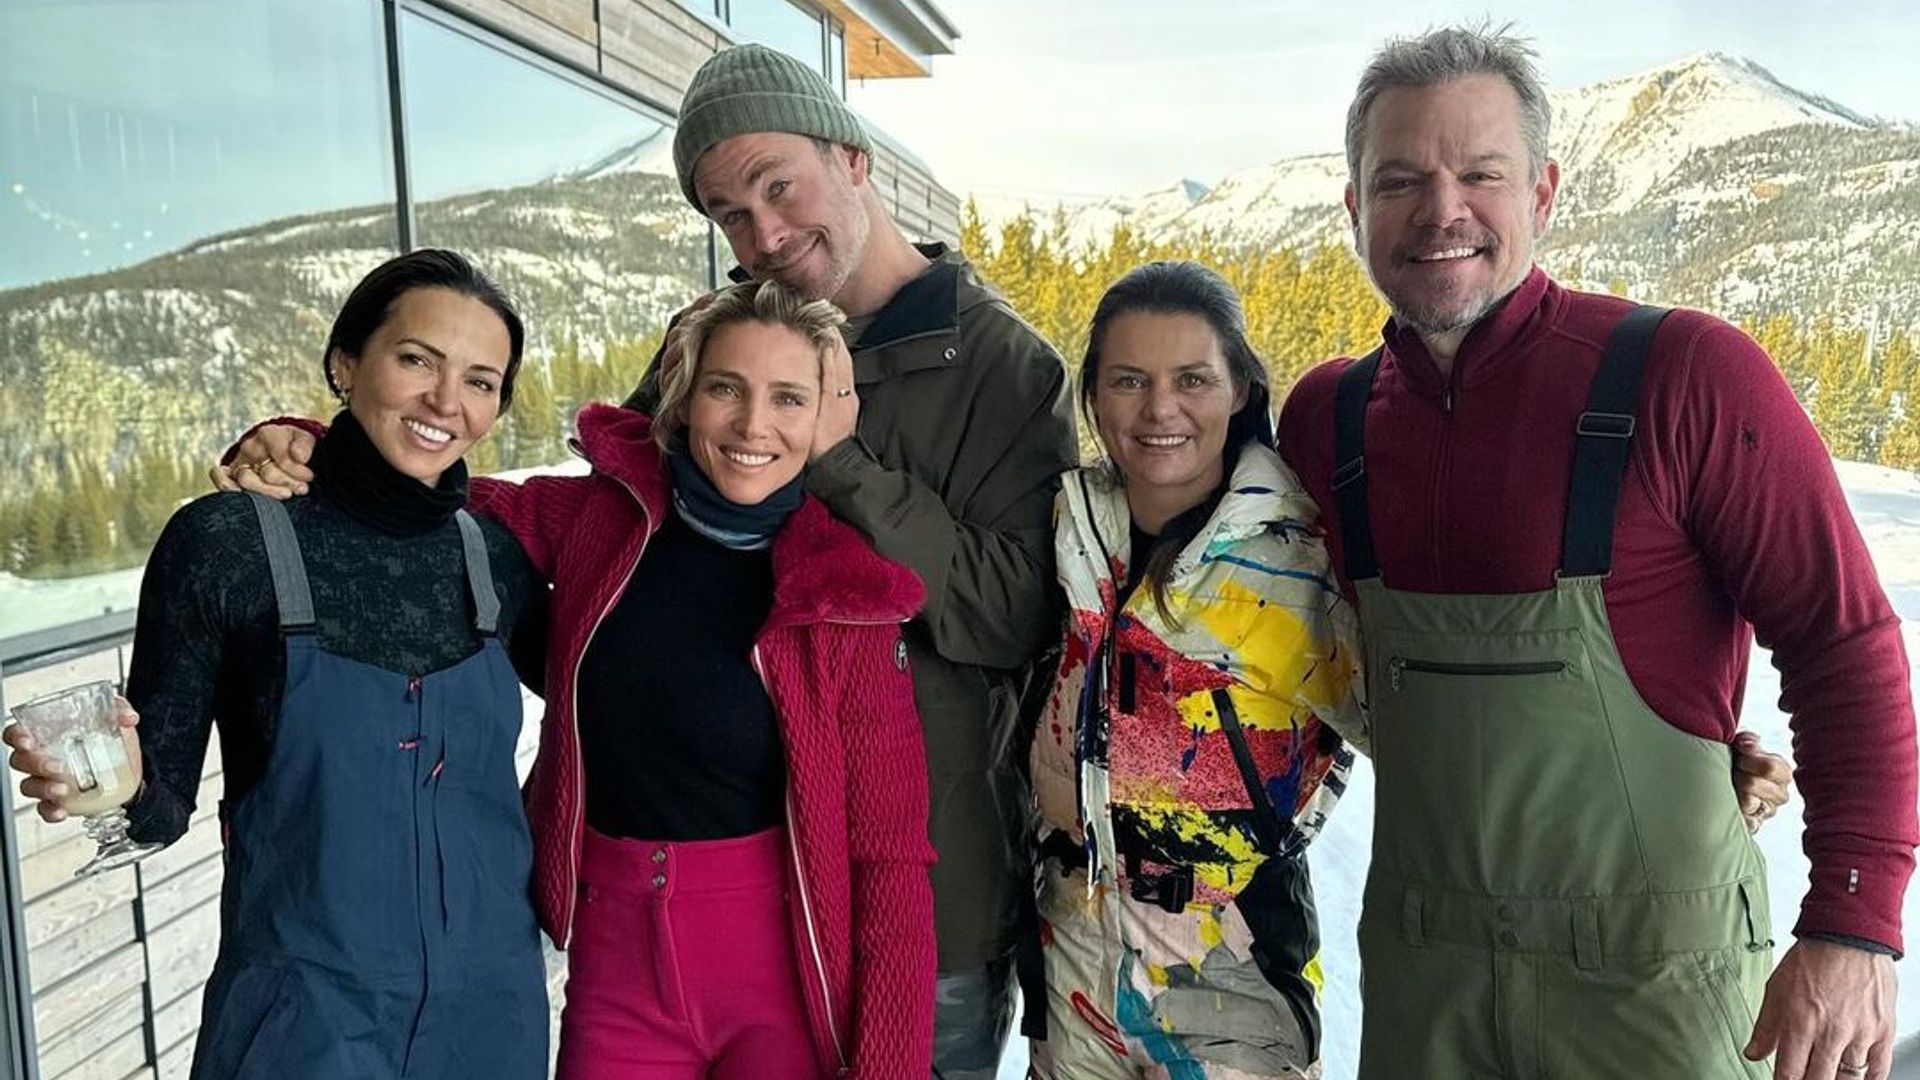 Matt and wife Luciana posed with Chris, Elsa and another friend